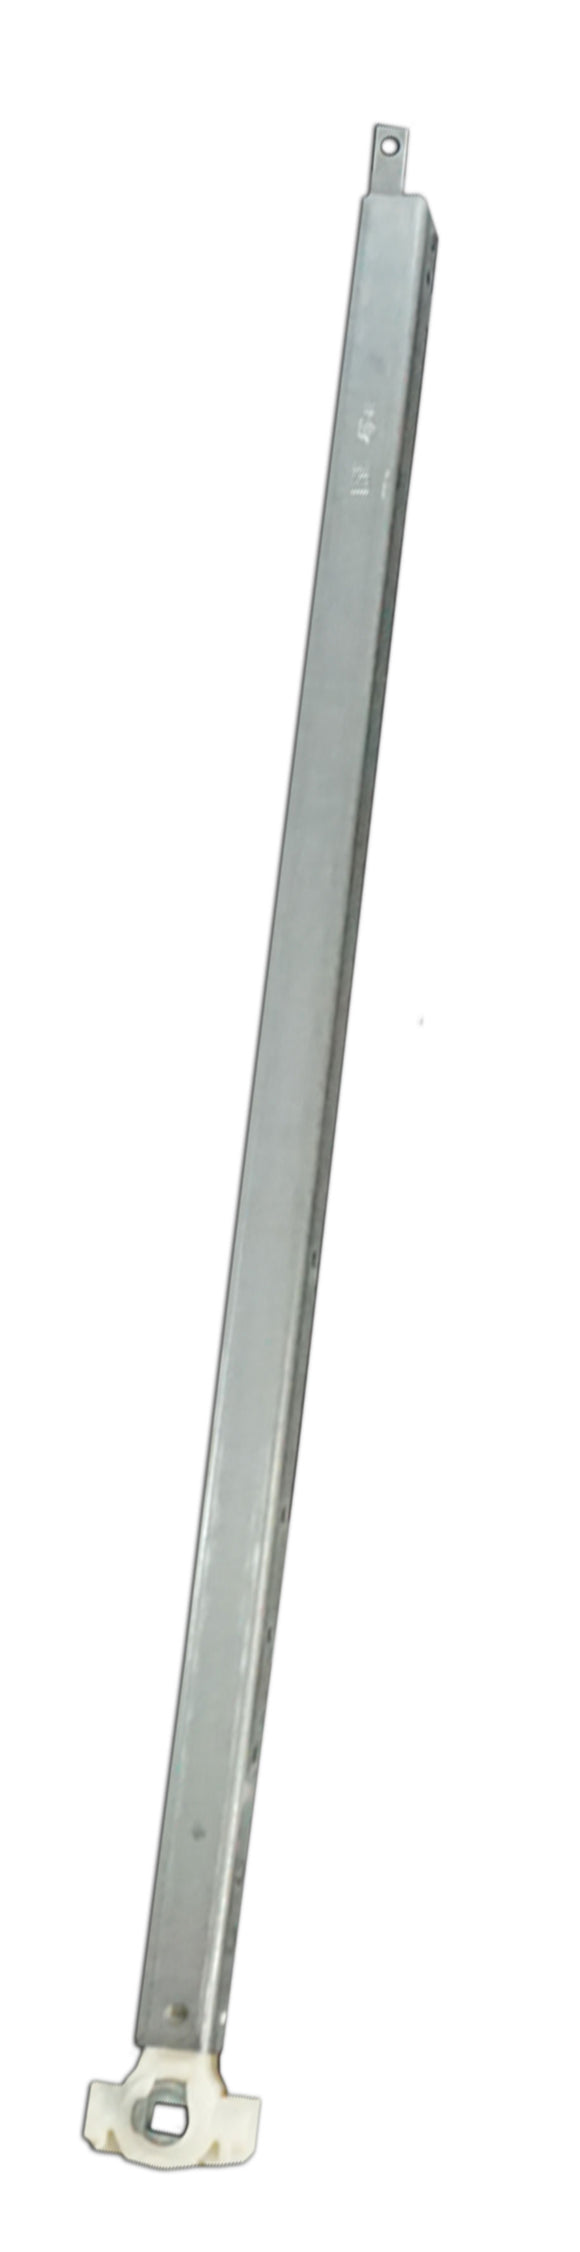 716 Series Inverted Block and Tackle Window Balance